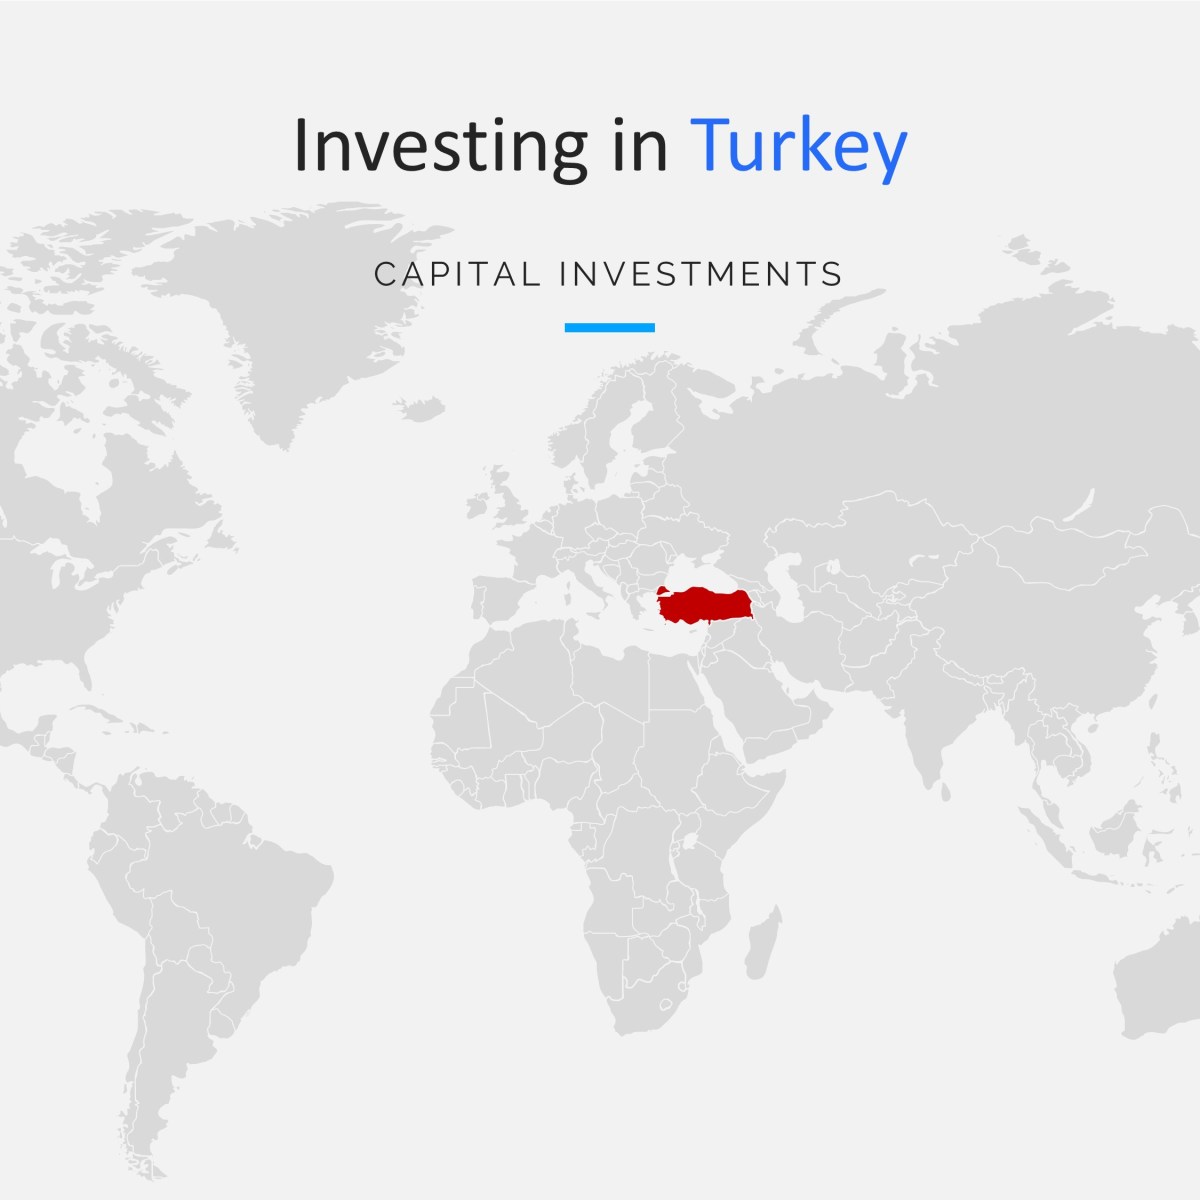 CAPITAL INVESTMENT IN TURKEY